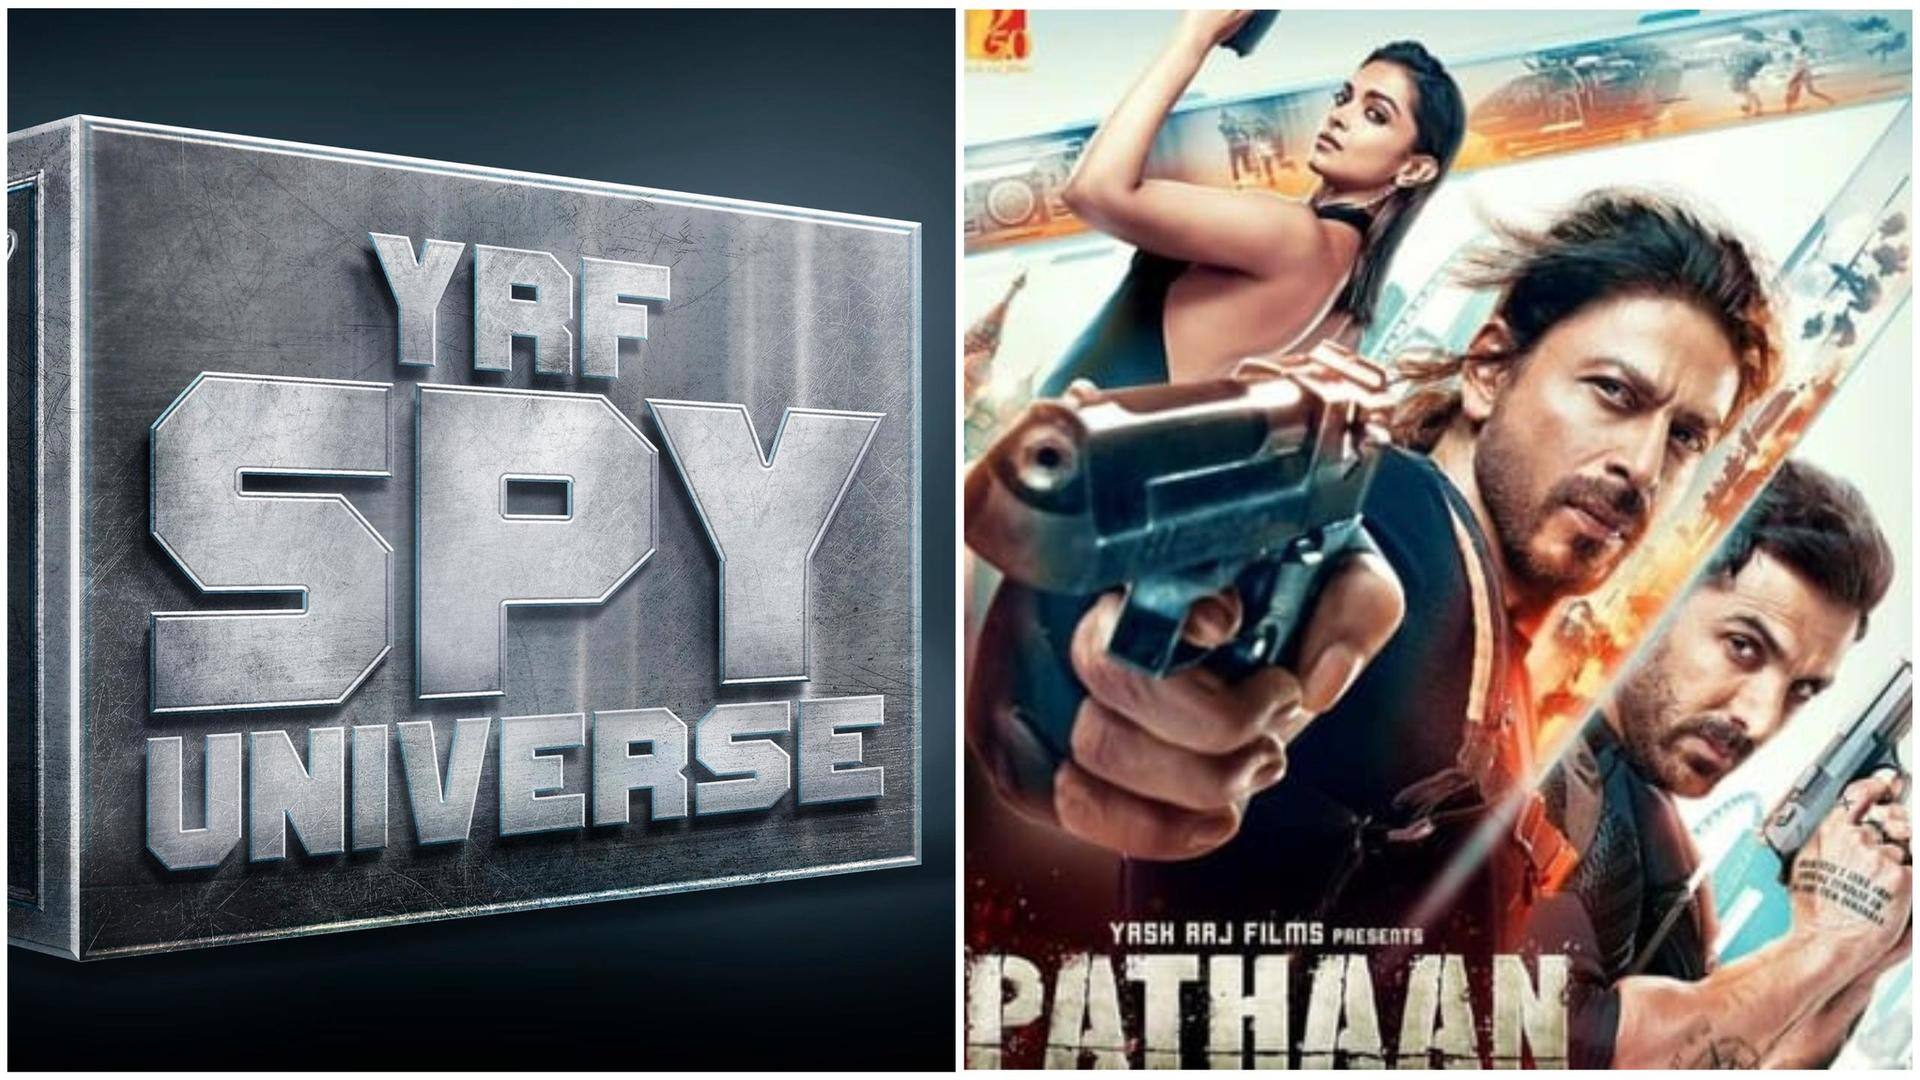 'Pathaan's much-awaited trailer to feature YRF's 'Spy Universe' logo